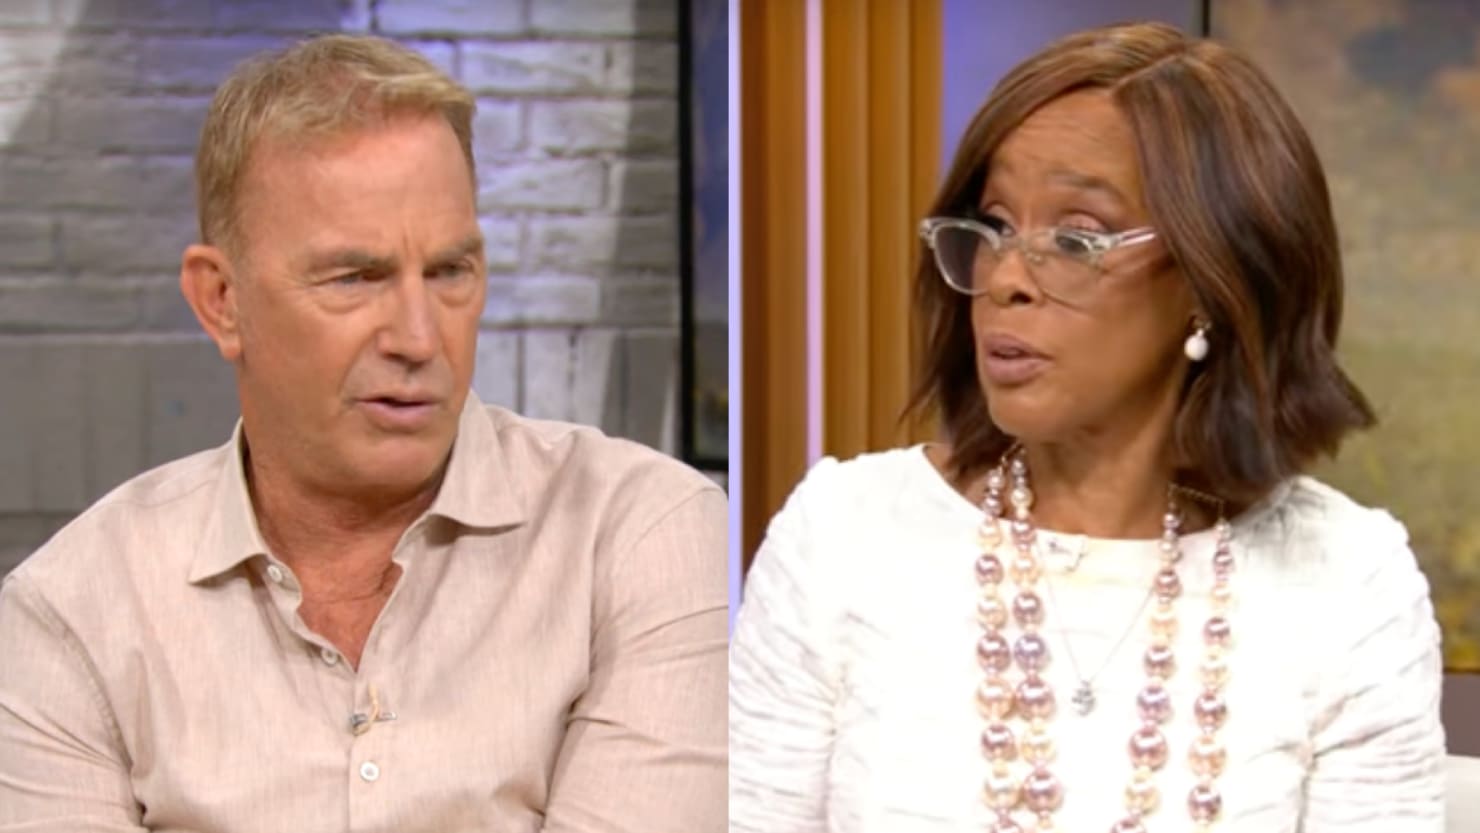 Kevin Costner Gets Angry at Gayle King Over Yellowstone Drama